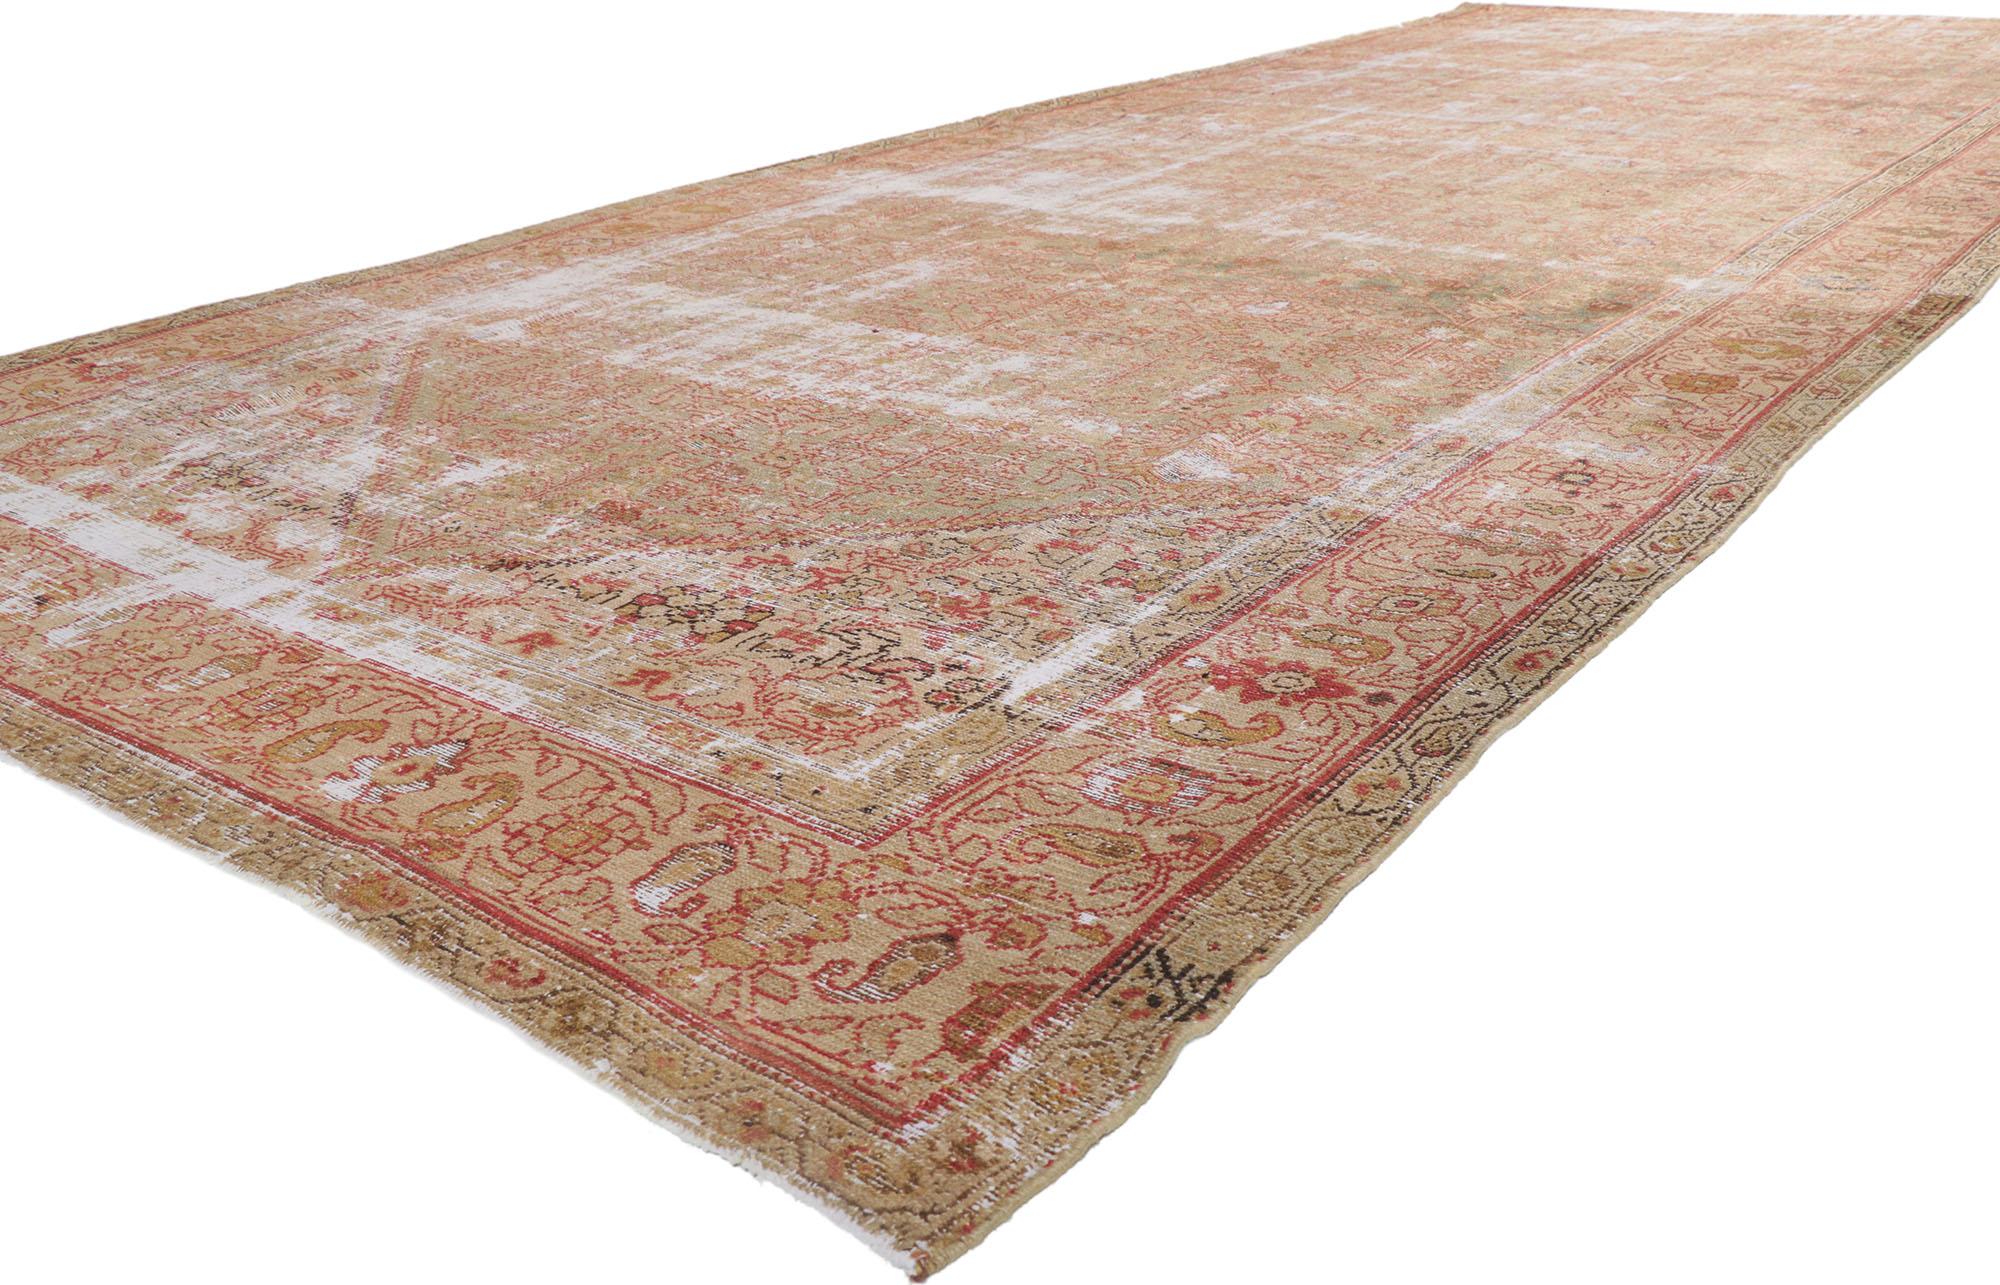 61030 Distressed Antique Persian Malayer Gallery rug with rustic style 06'07 x 16'05. This hand knotted wool distressed faded antique Persian Malayer Gallery rug features a lively all-over floral lattice pattern composed of Mina Khani design and